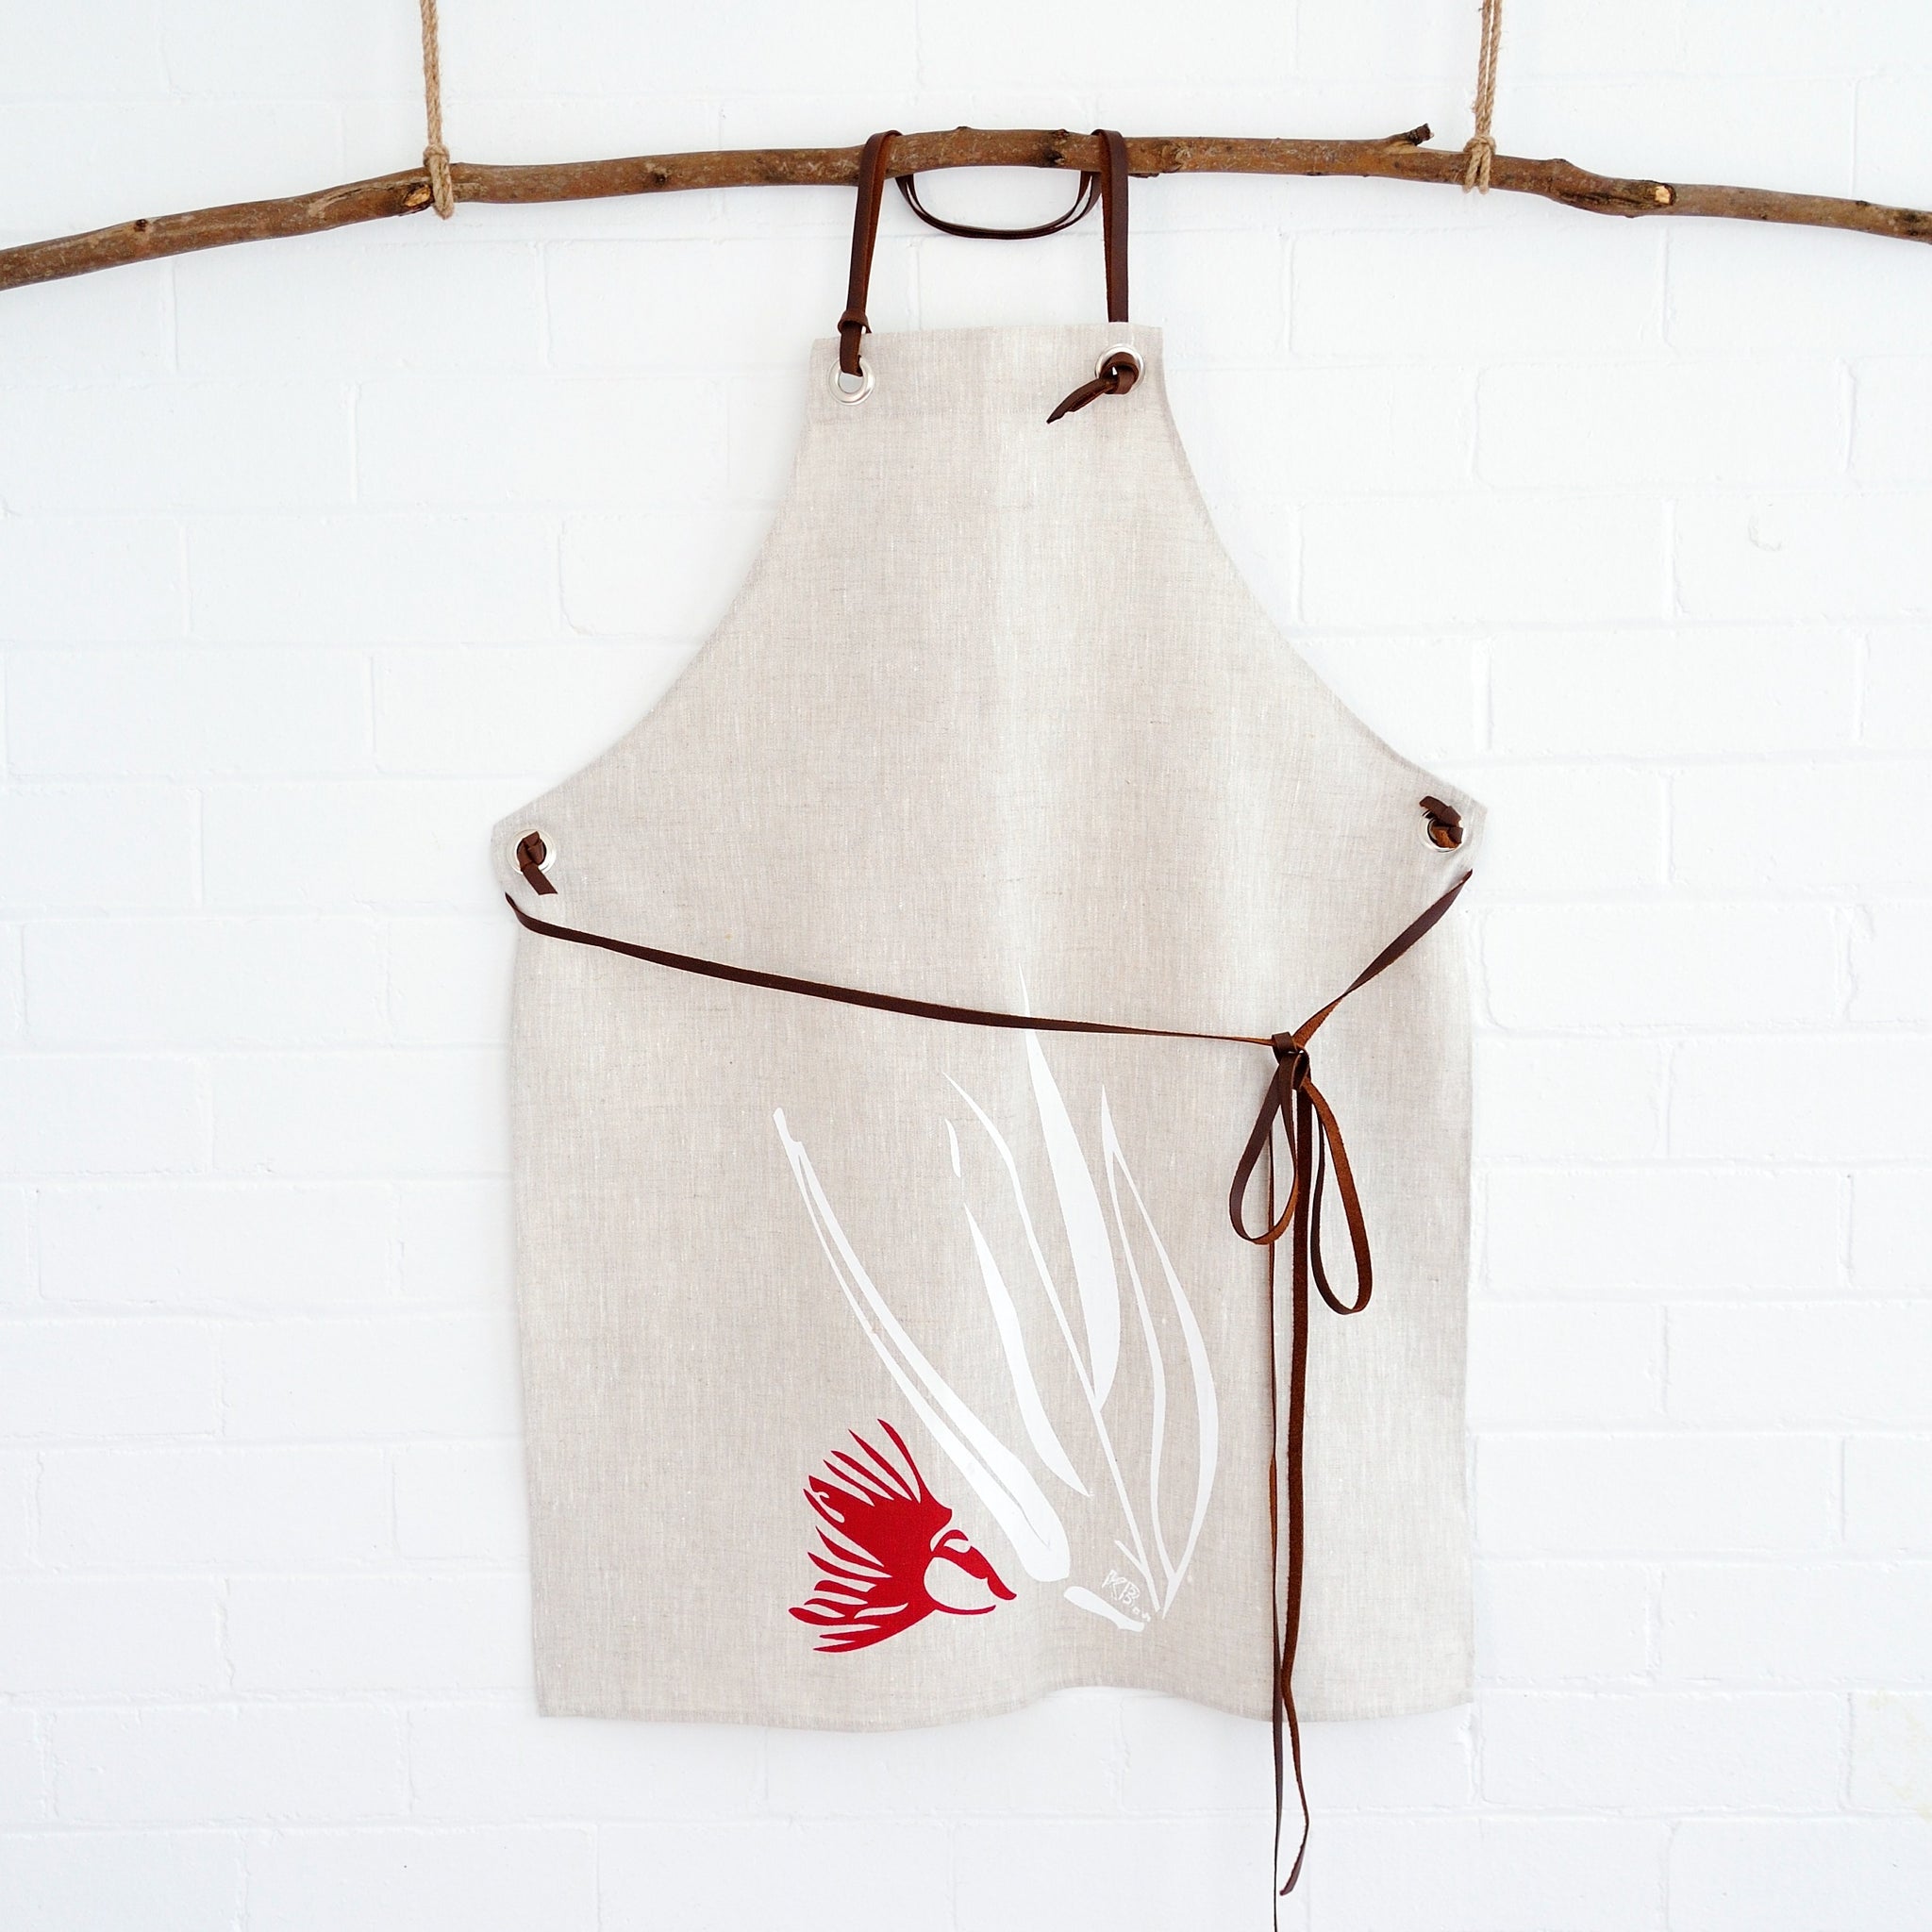 100% linen hand screen printed red and white gum nut adults apron with leather straps by Krystol Brailey Designs